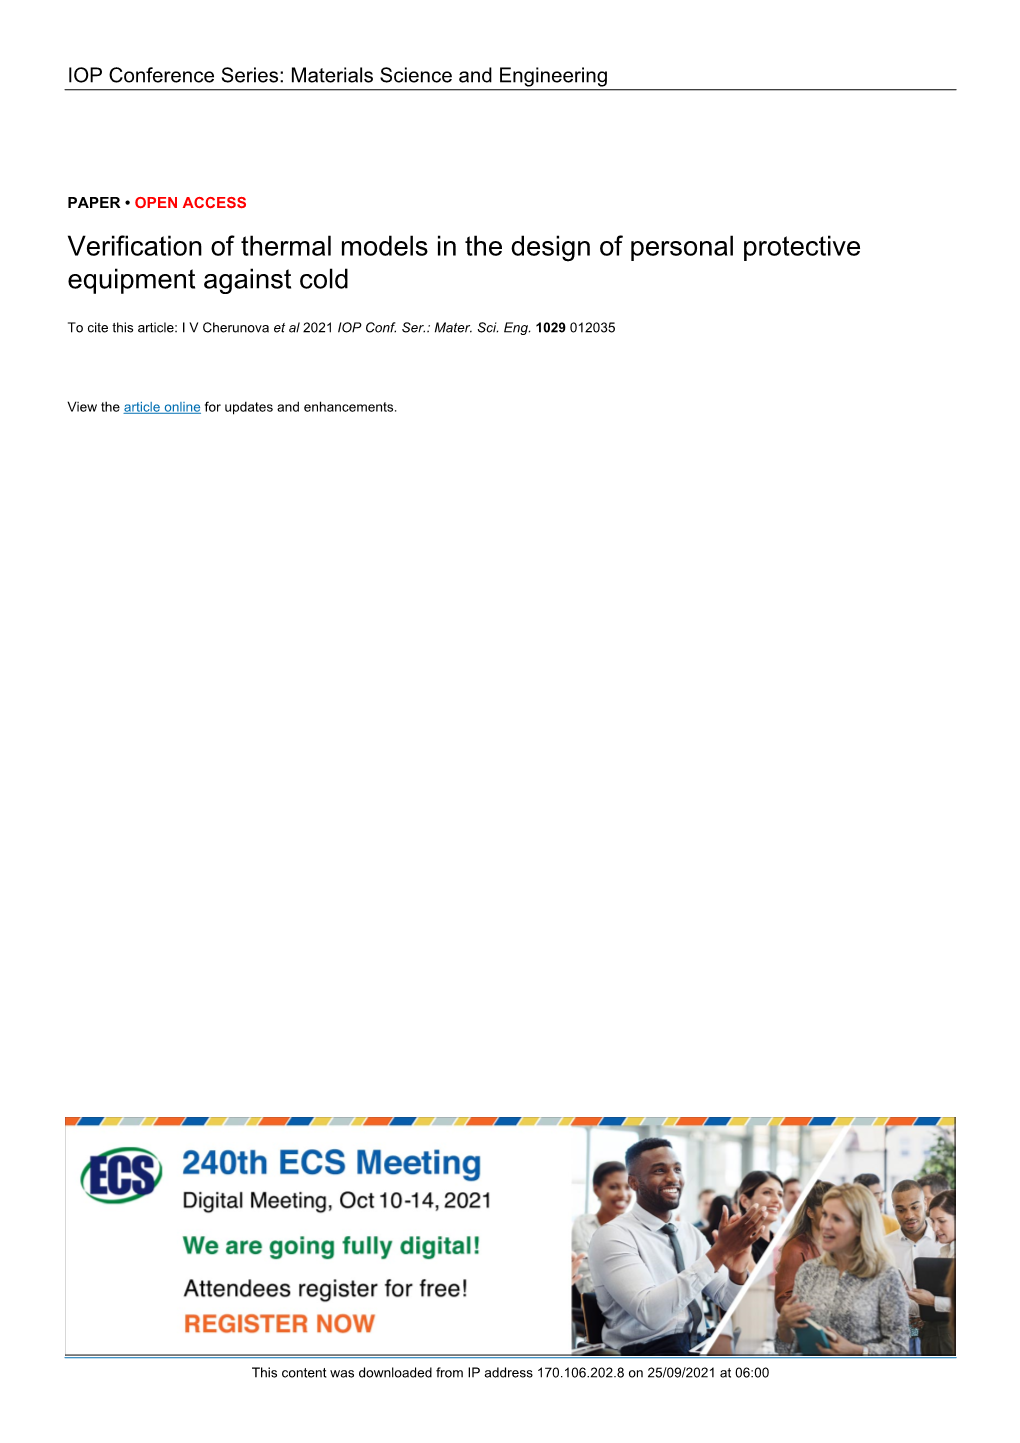 Verification of Thermal Models in the Design of Personal Protective Equipment Against Cold